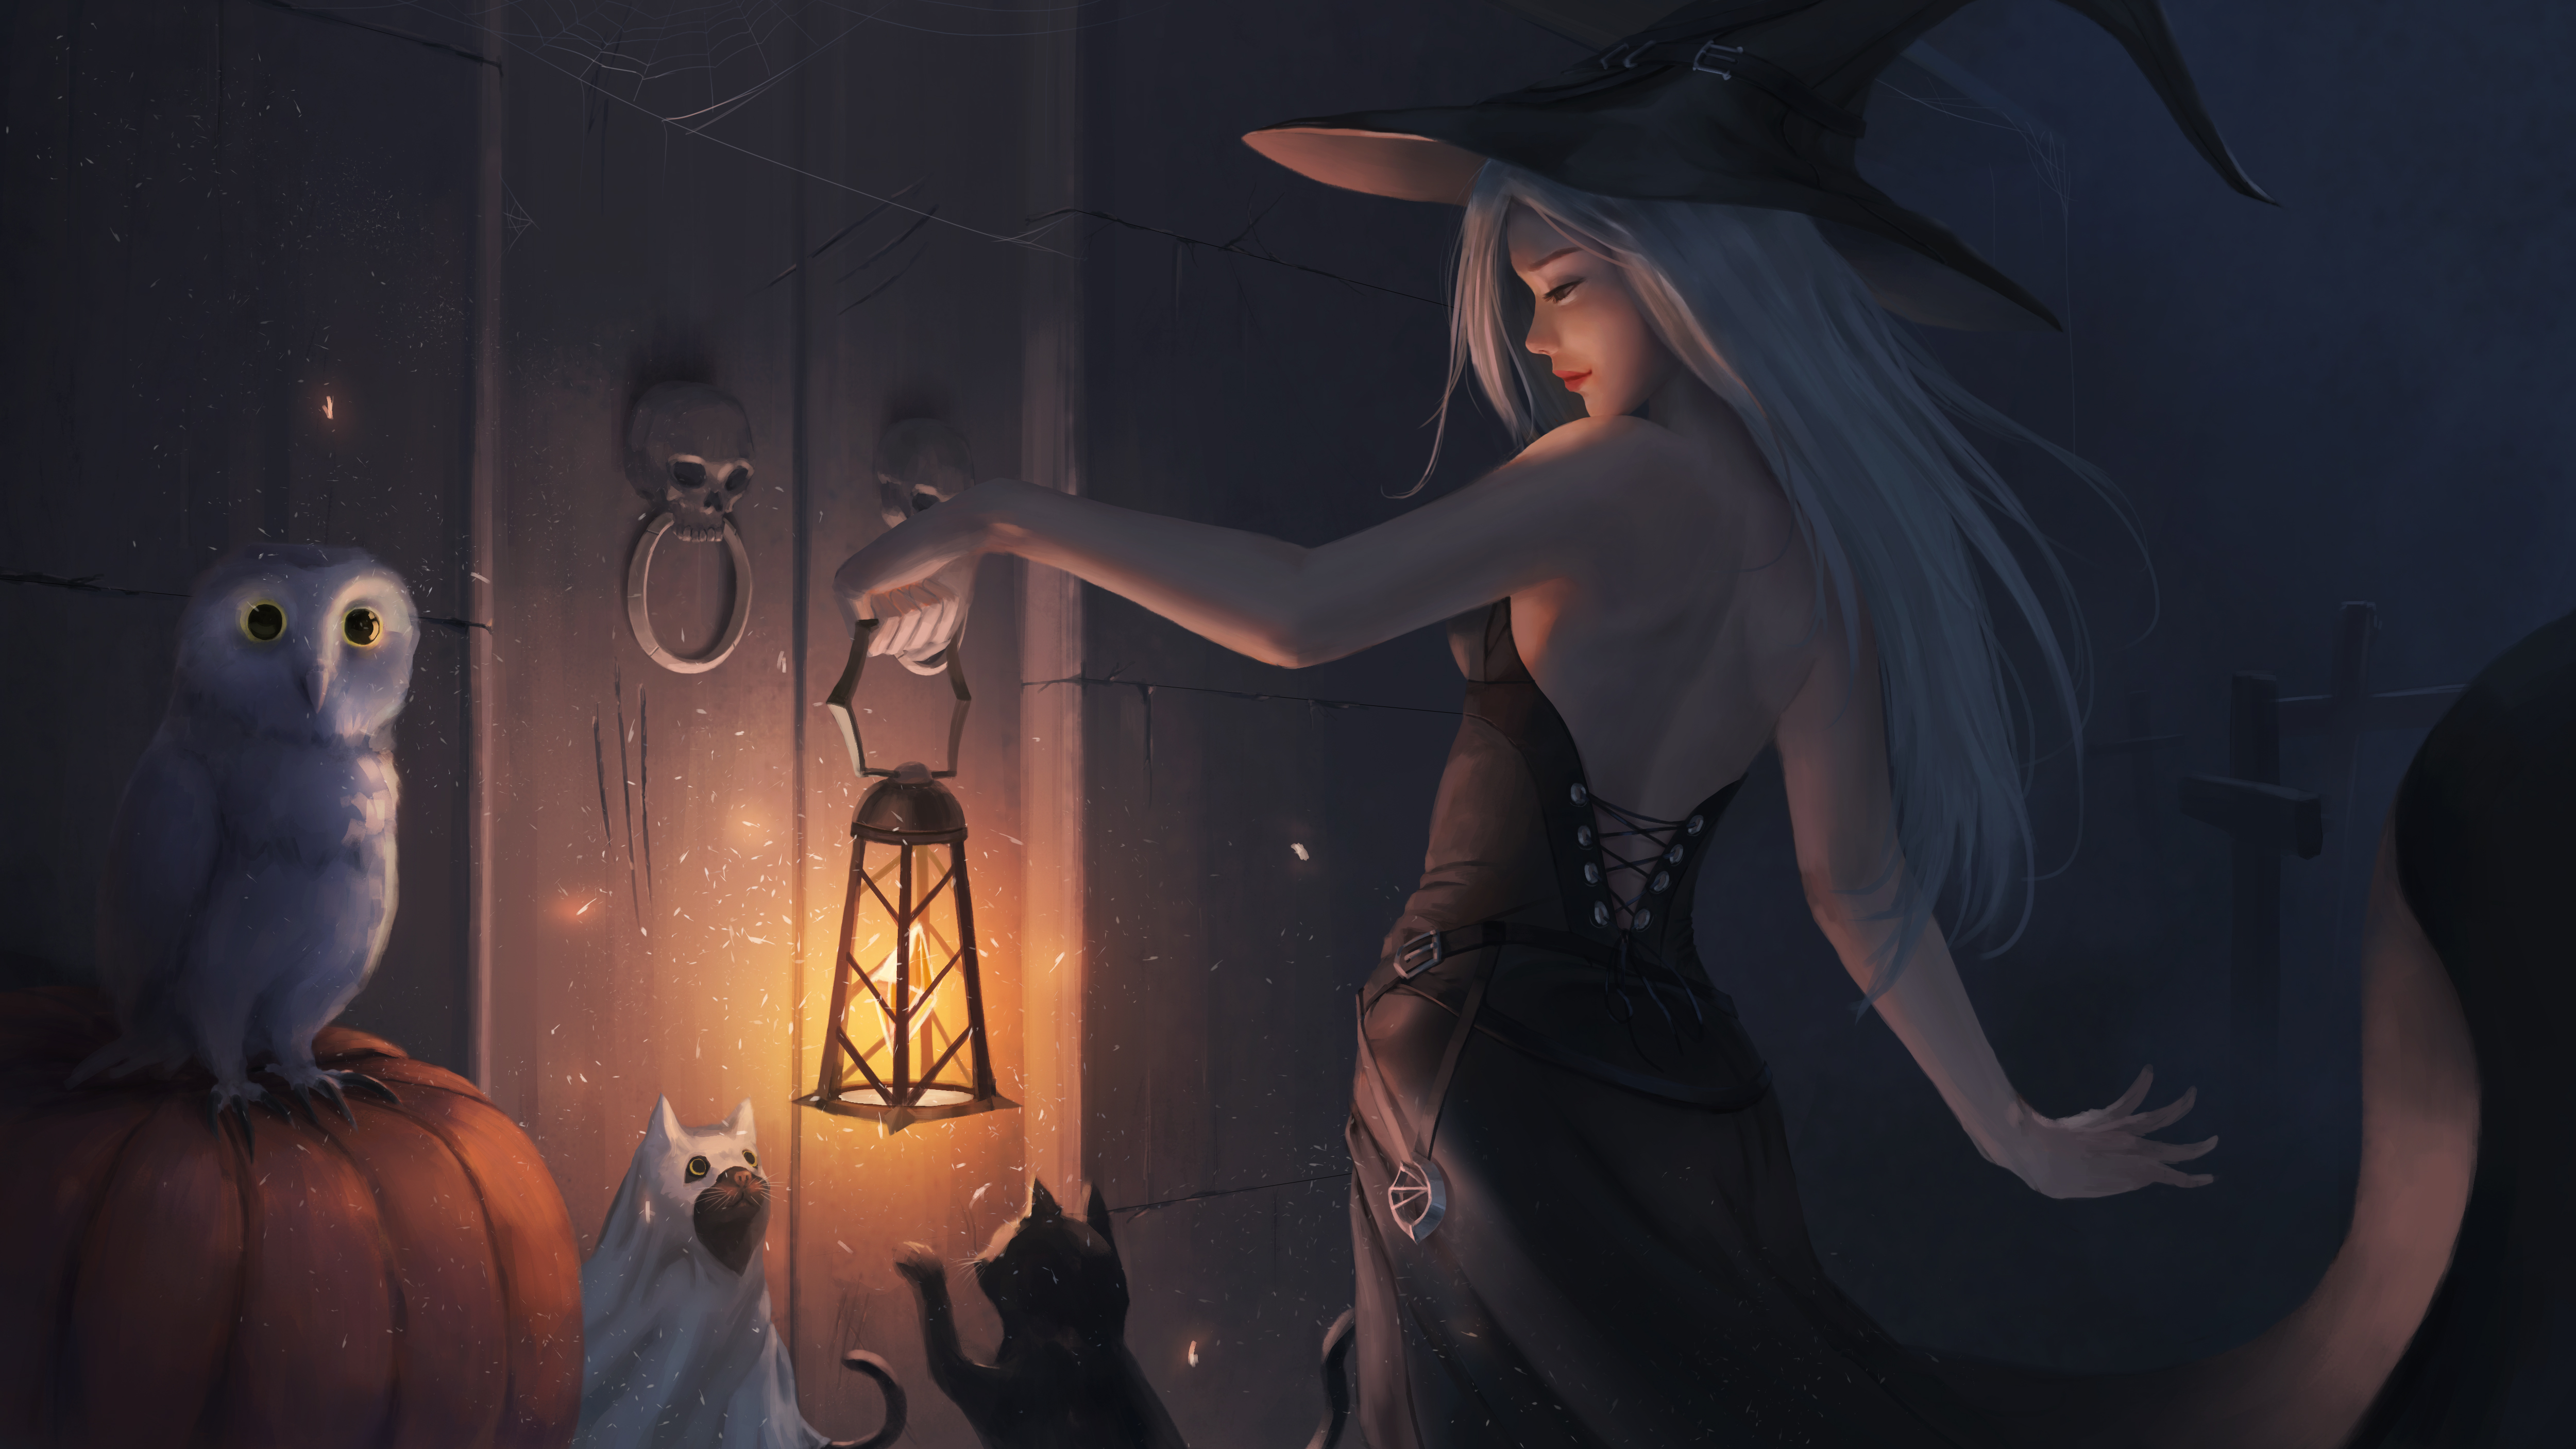 Women Fantasy Girl Witch Witch Hat Women With Hats Fantasy Art Environment White Hair Long Hair Dres 5000x2812